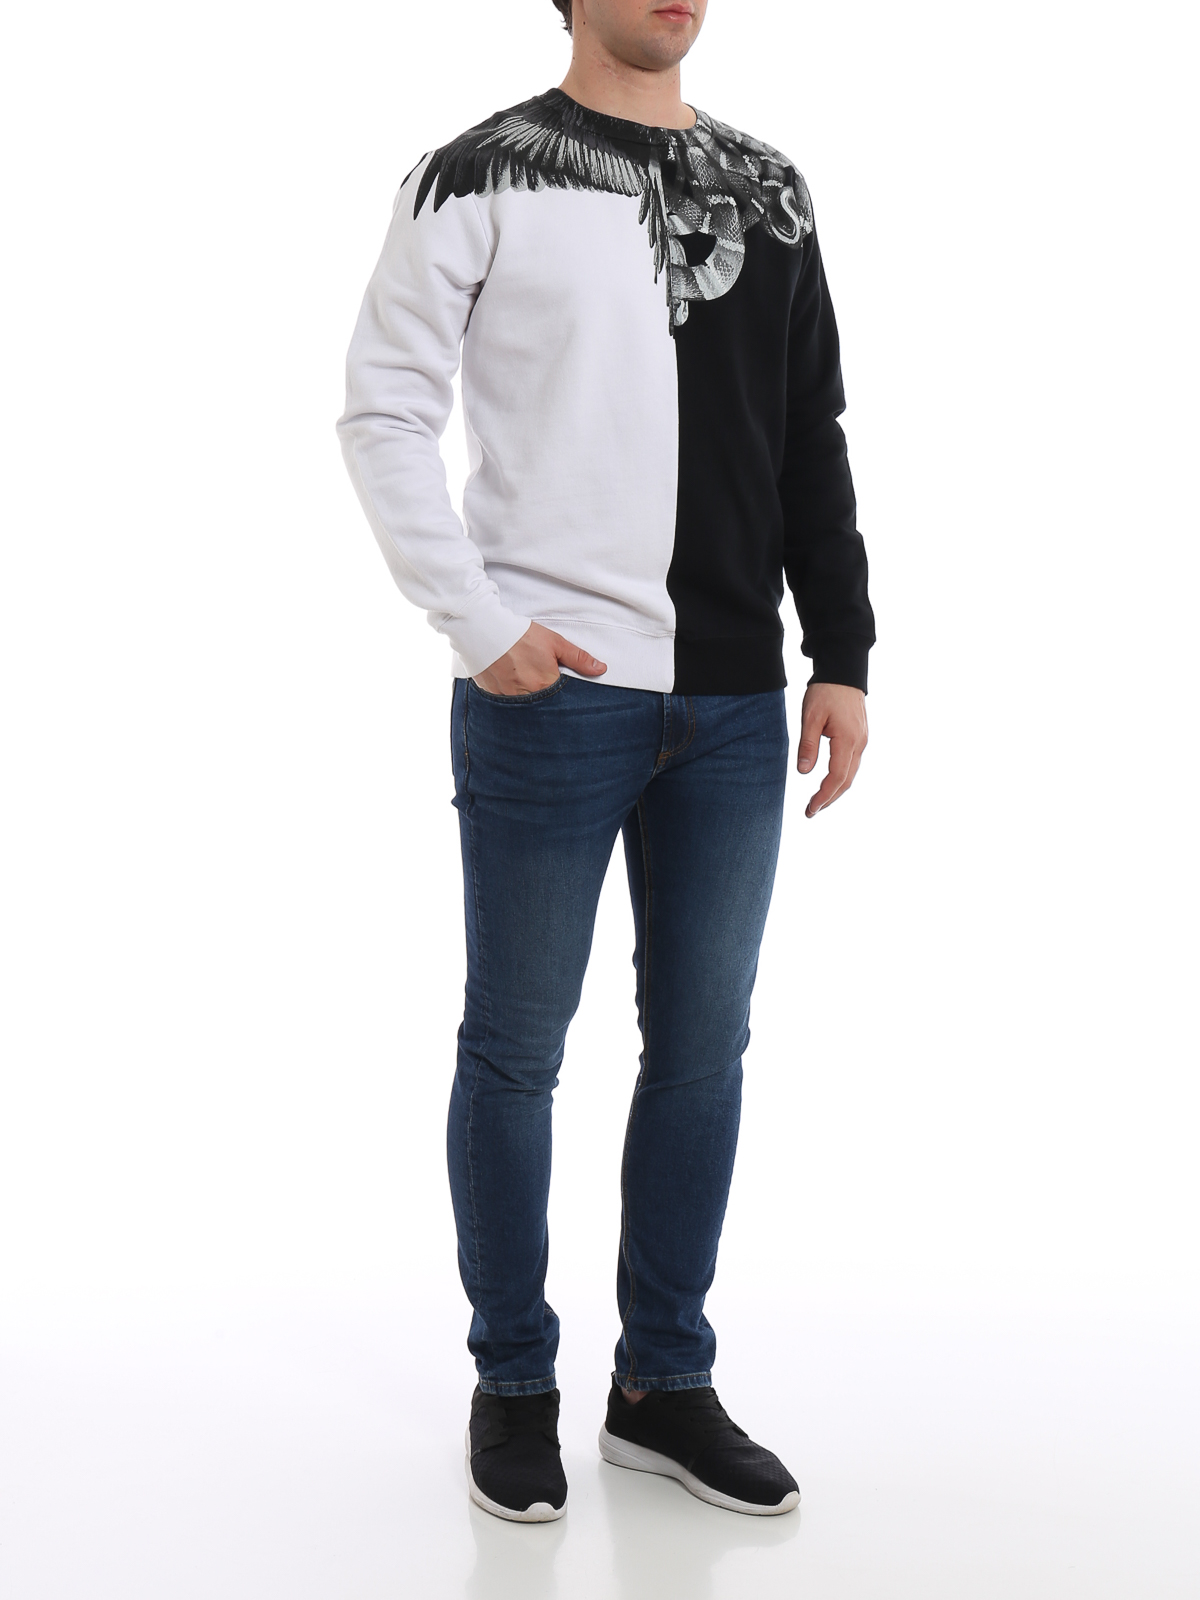 & Sweaters Marcelo Burlon - Wings Snakes and white sweatshirt - CMBA009R196300201091